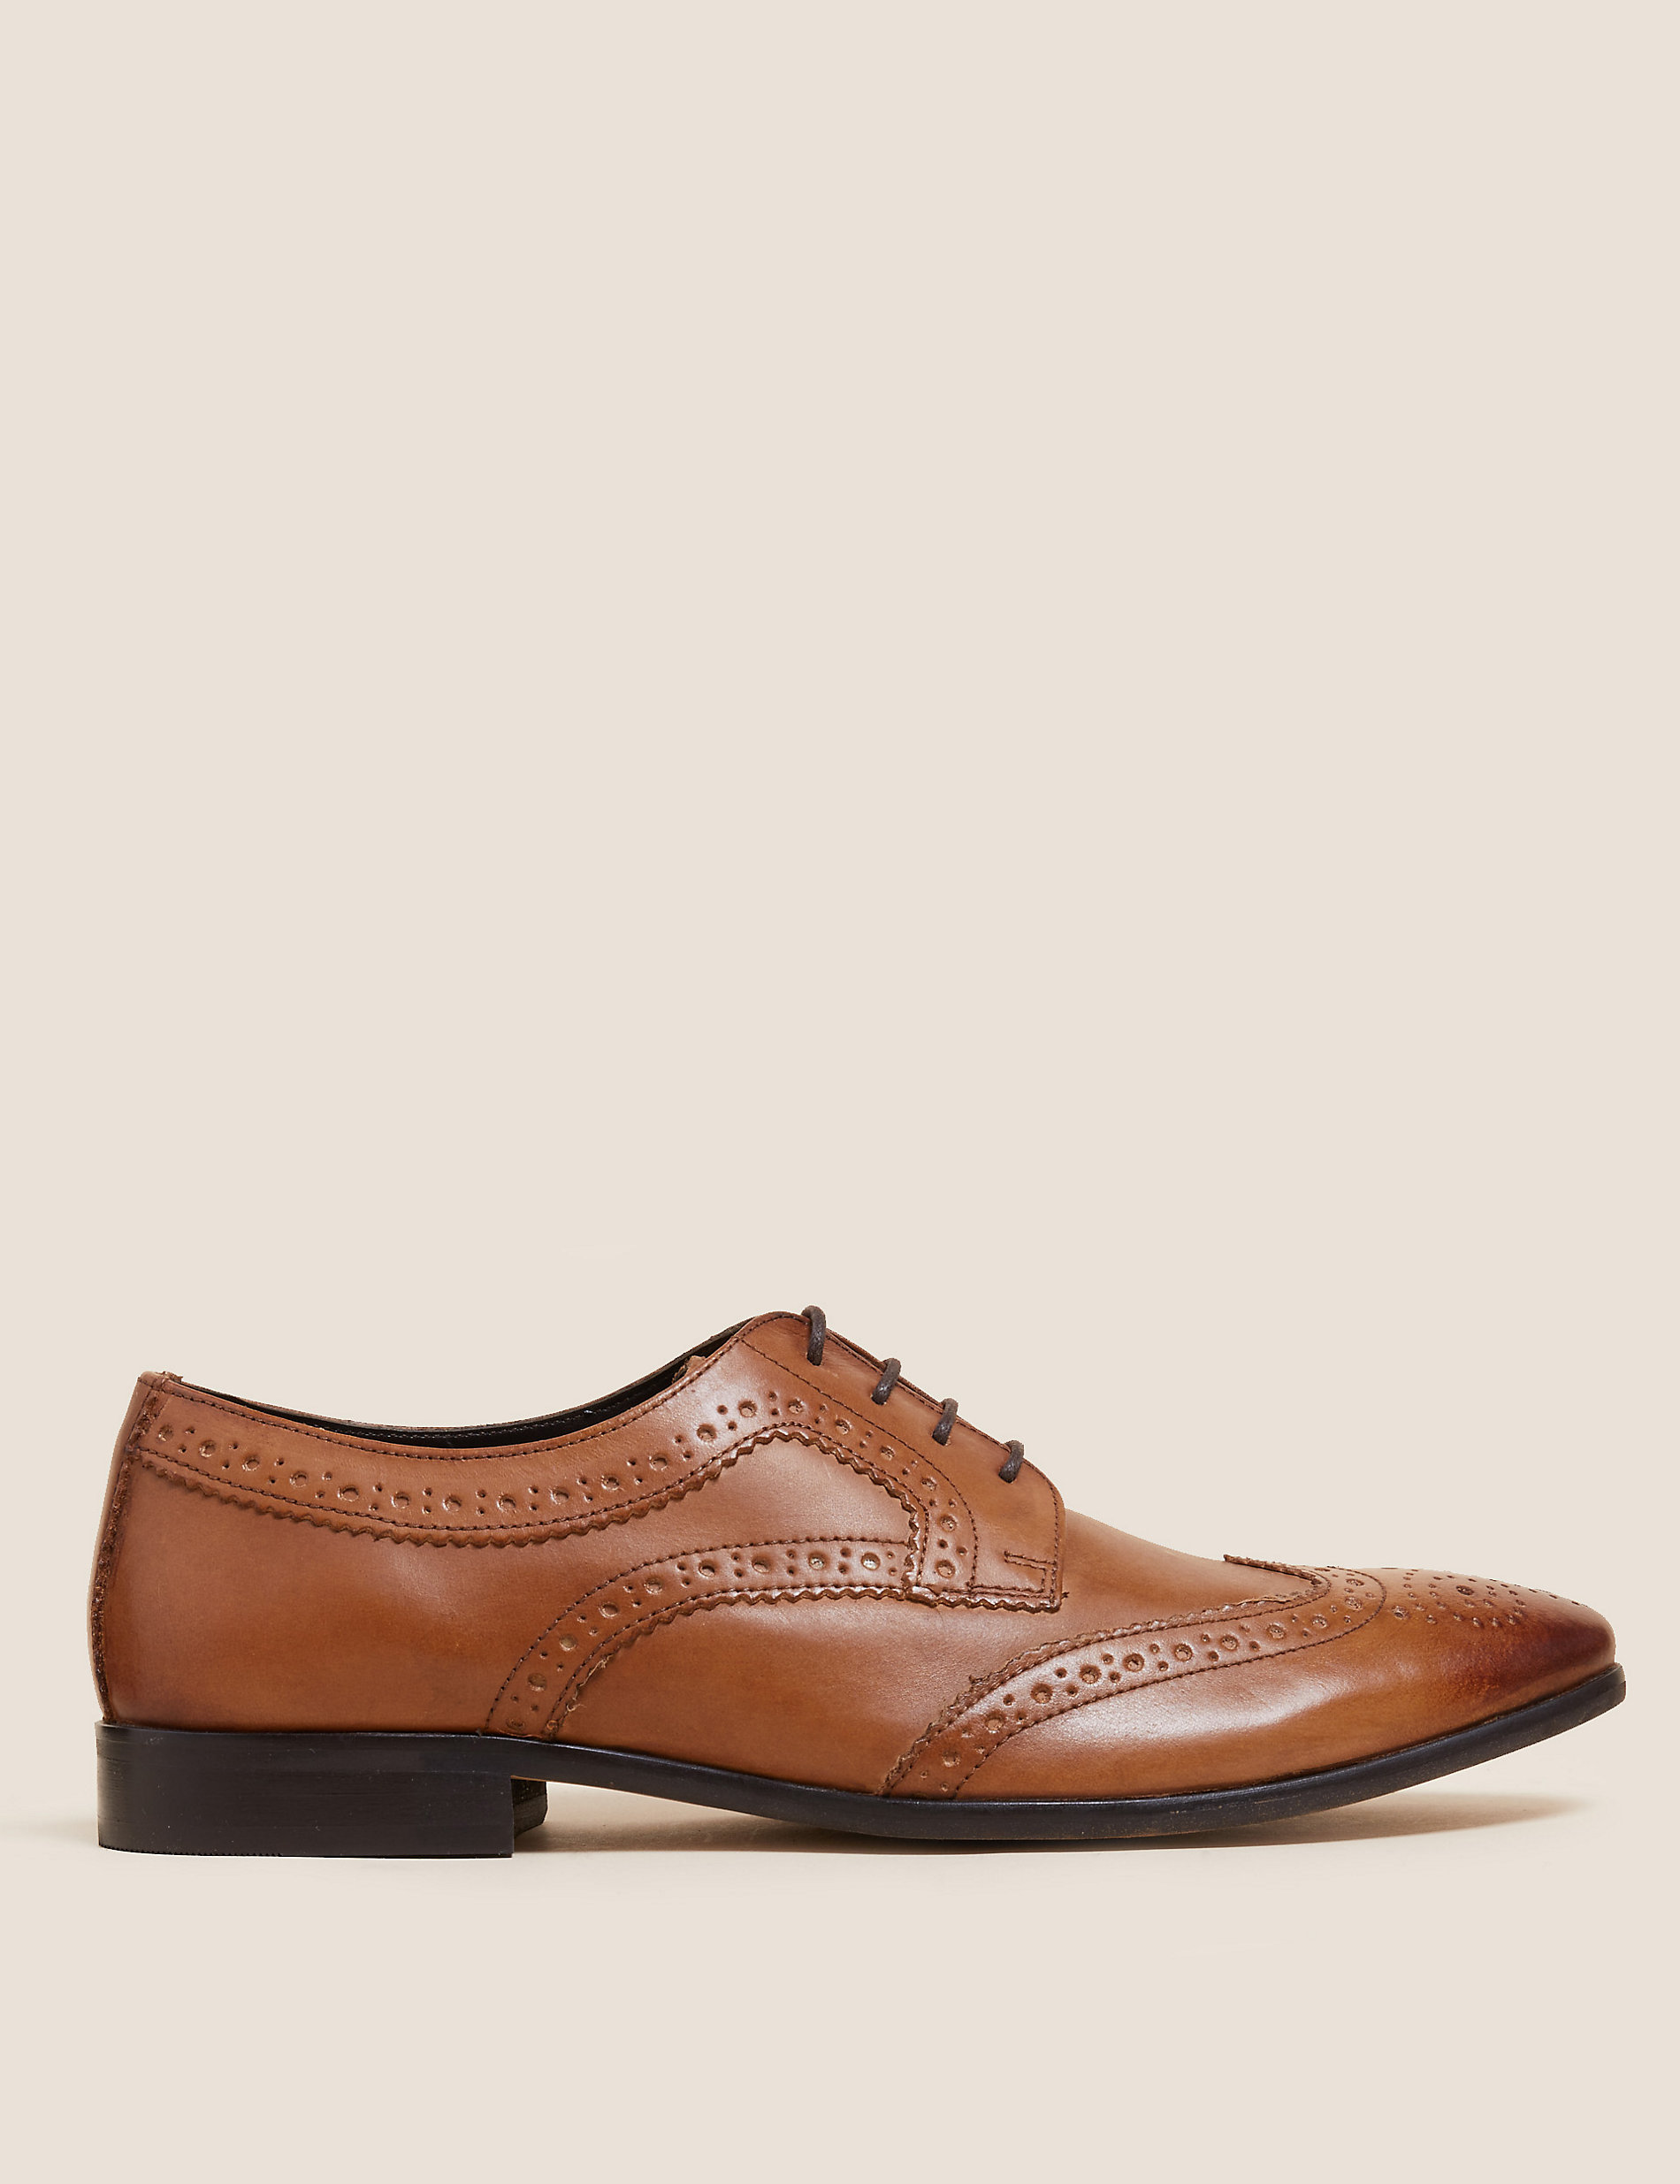 Leather Almond Toe Brogues